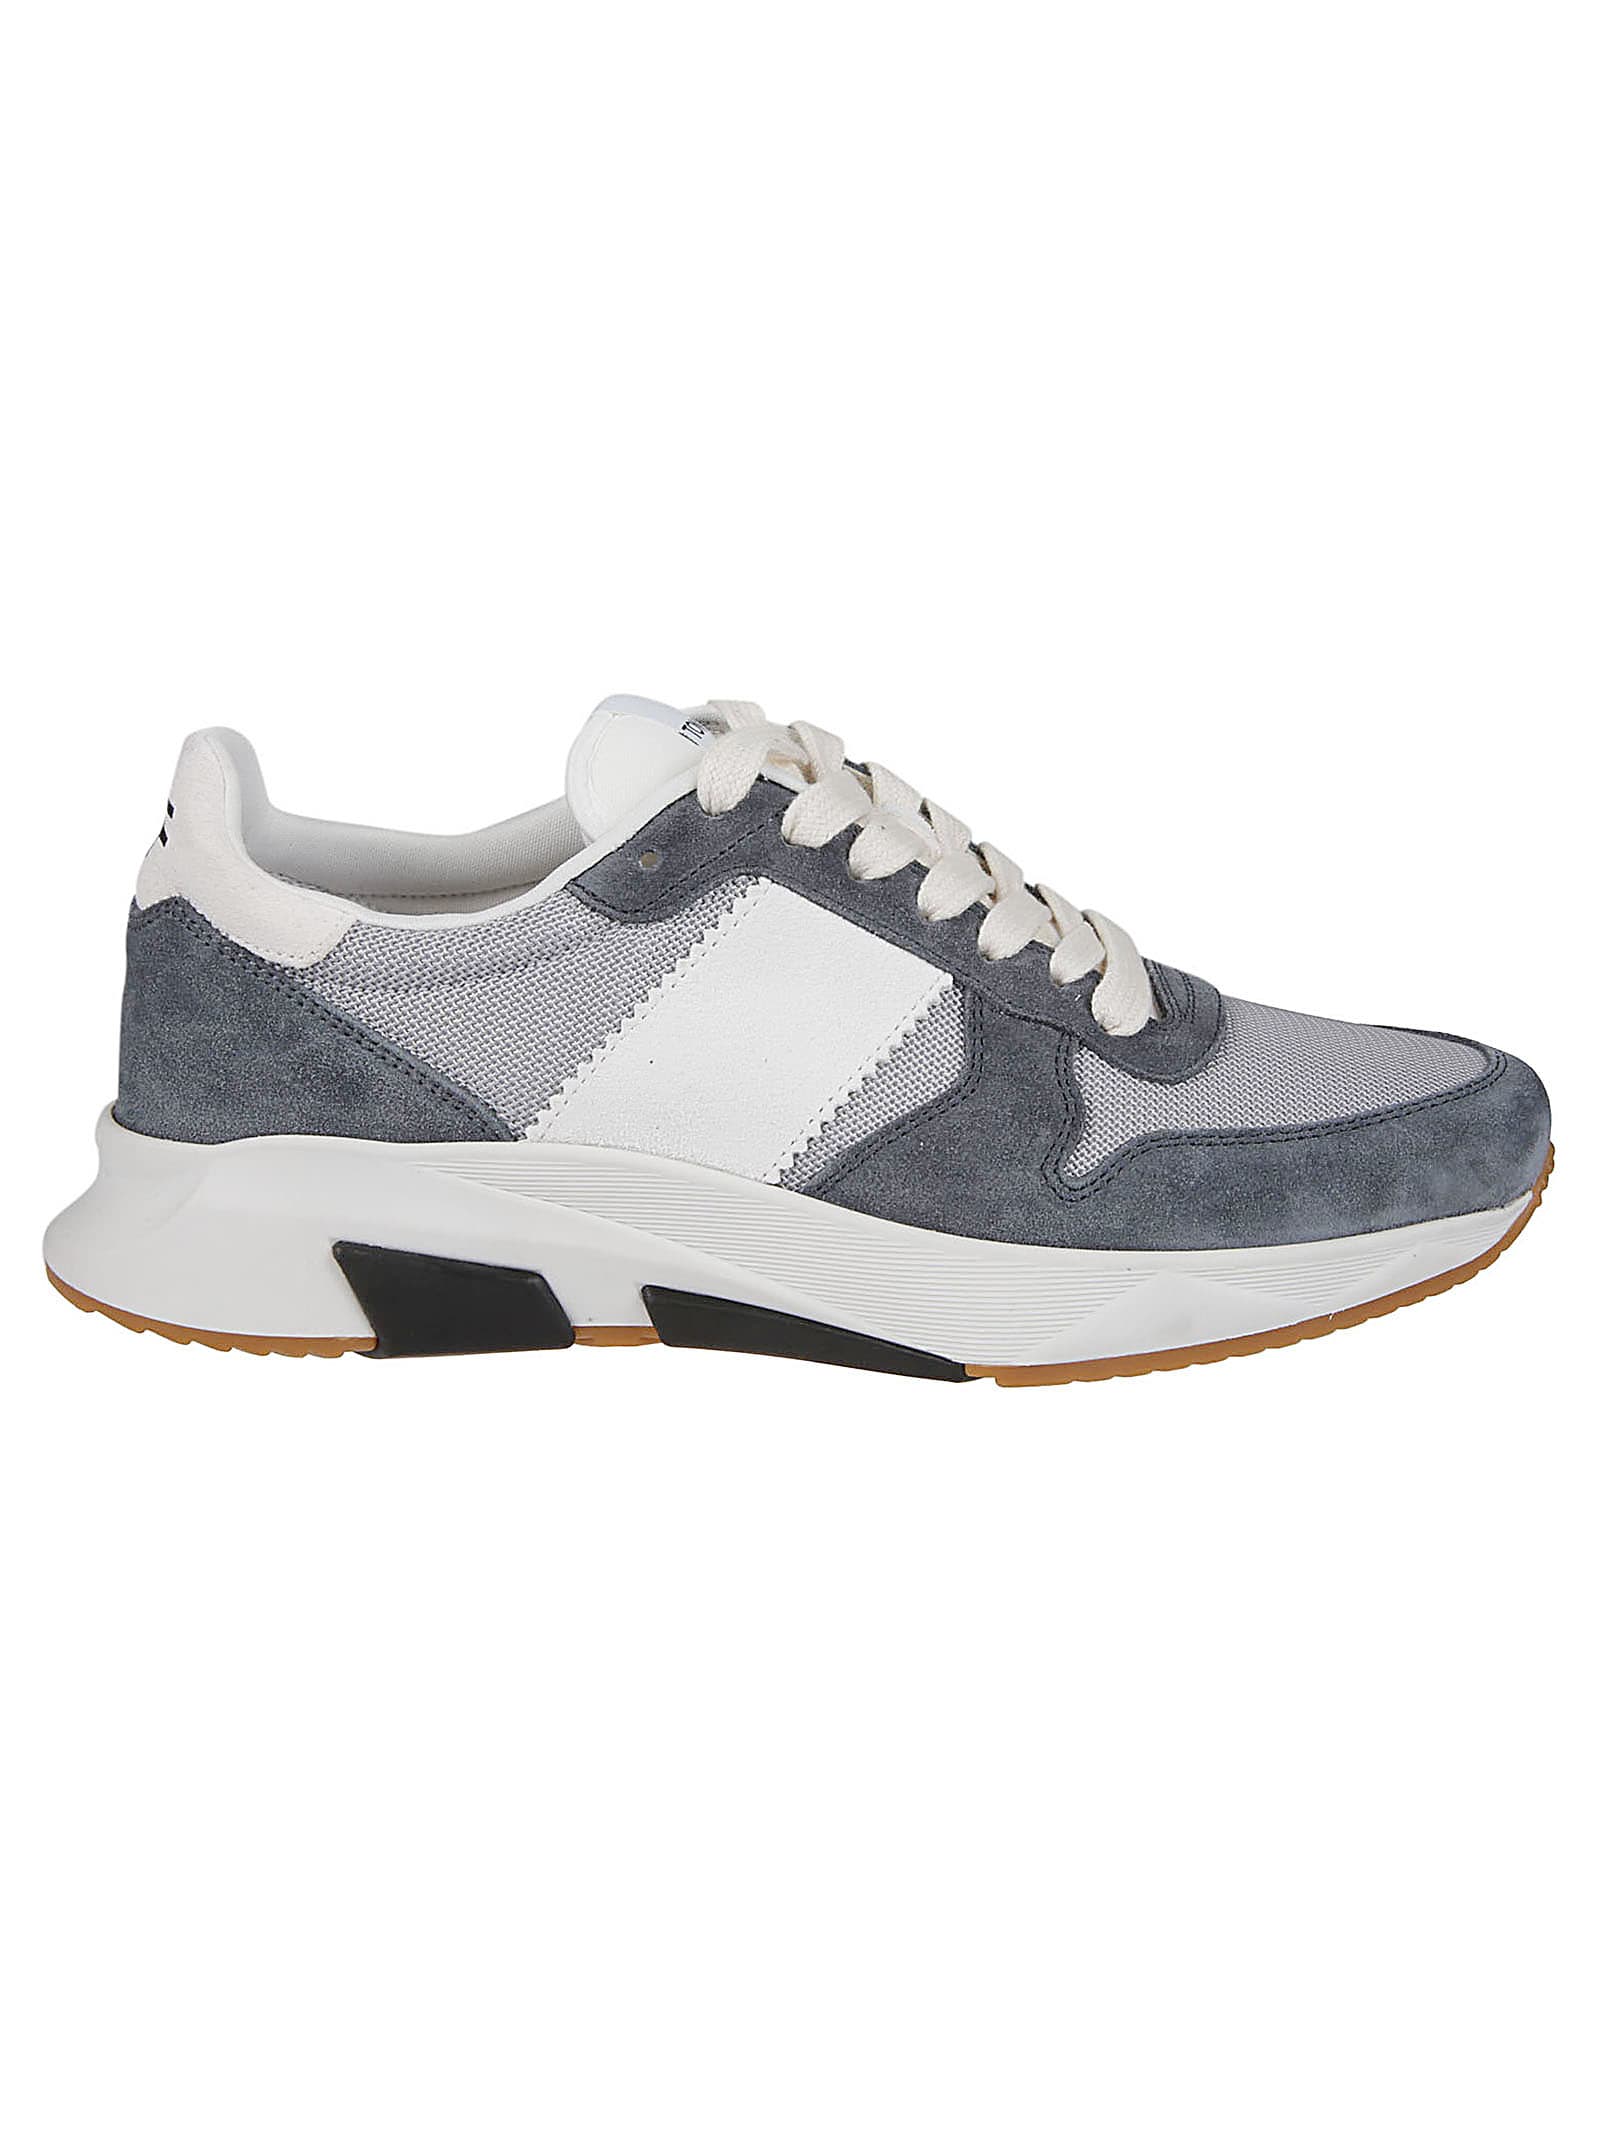 Tom Ford Jago Low Top Trainers In Silver/petrol Blue/white